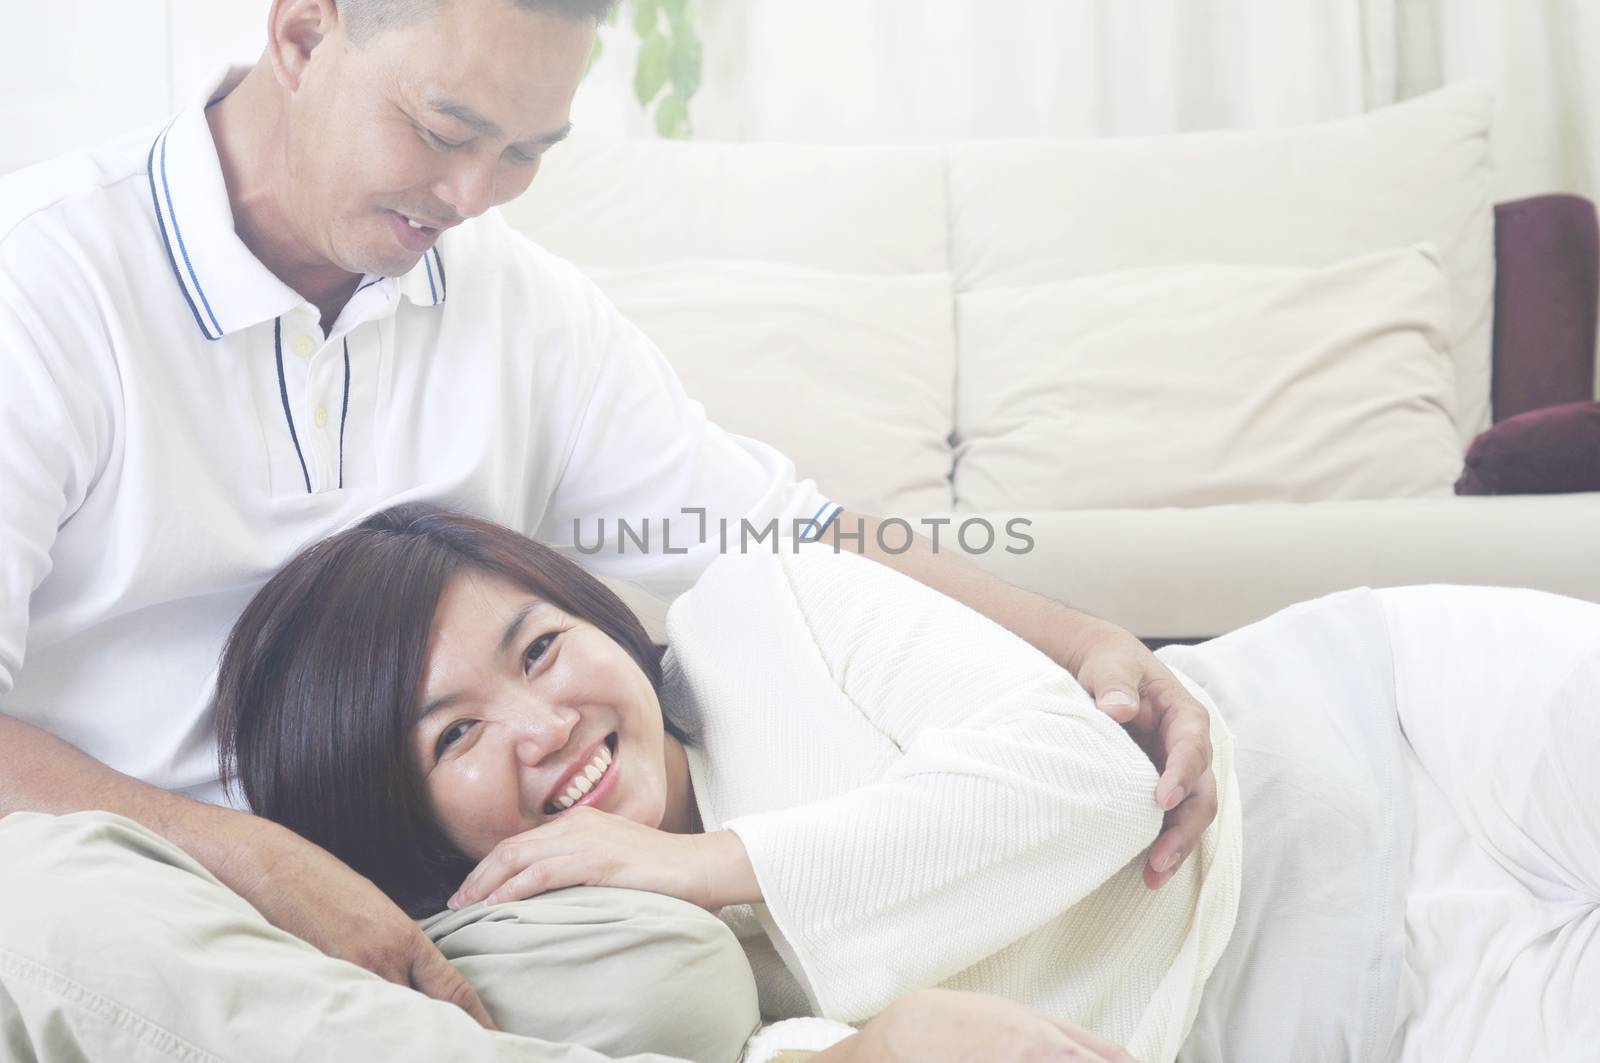 Happy Asian Middle age couple  in love having a good time at home